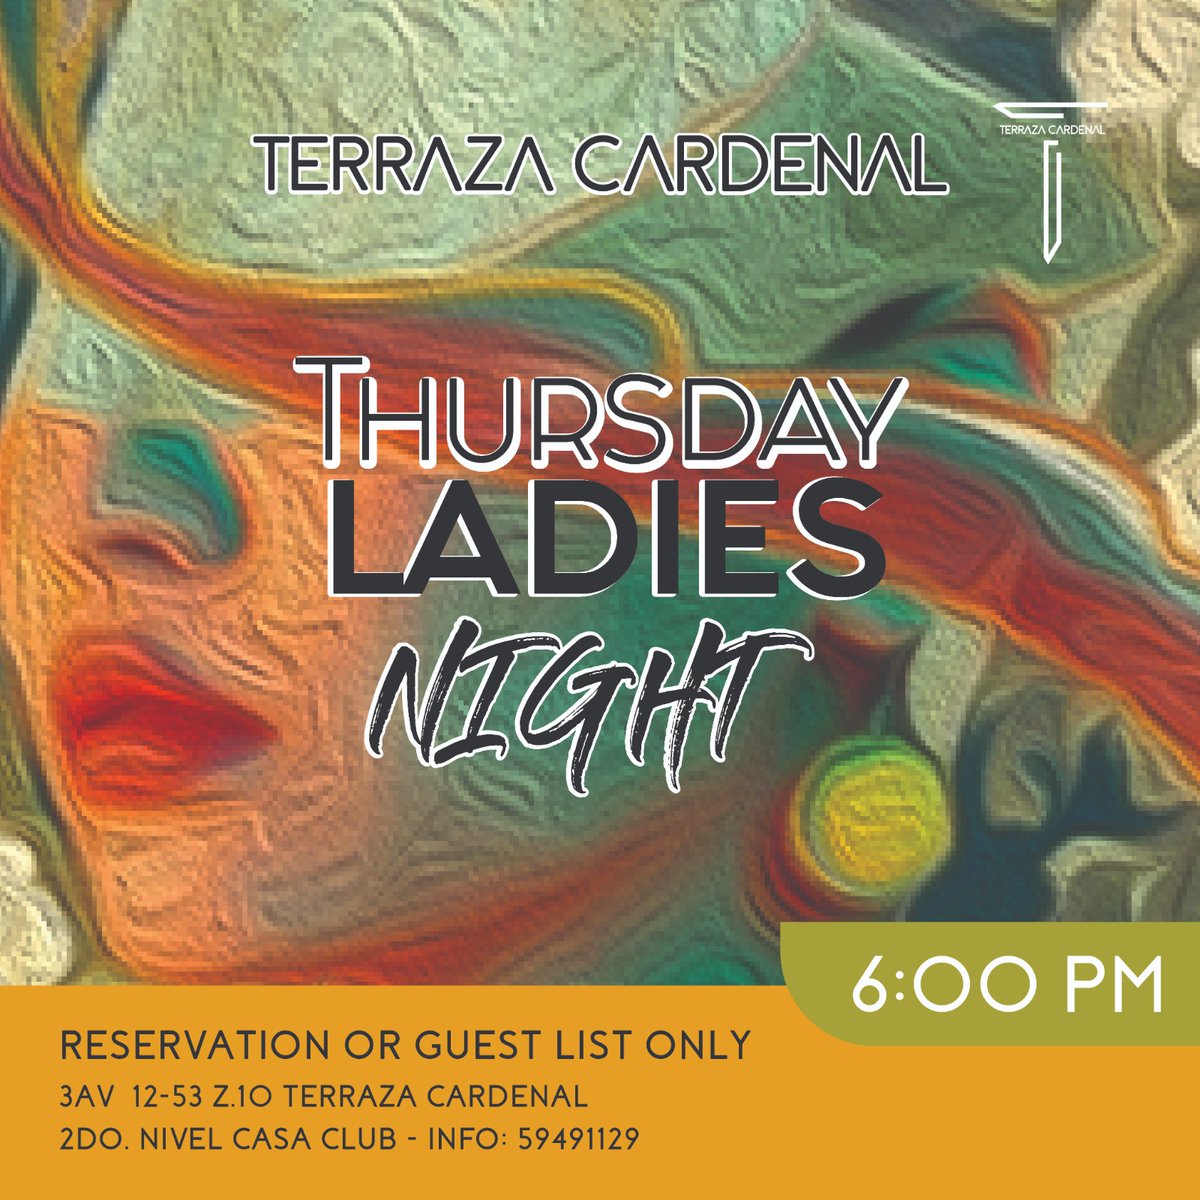 Thursday sunset & ladies night
@ terraza cardenal z.10

#daynnight #clubbar #meet #food #drinks #friends #cool #party #Guatemala #atardecer #noche #ladiesnight

#onlywithreservation or #list

Rsvp/info dm